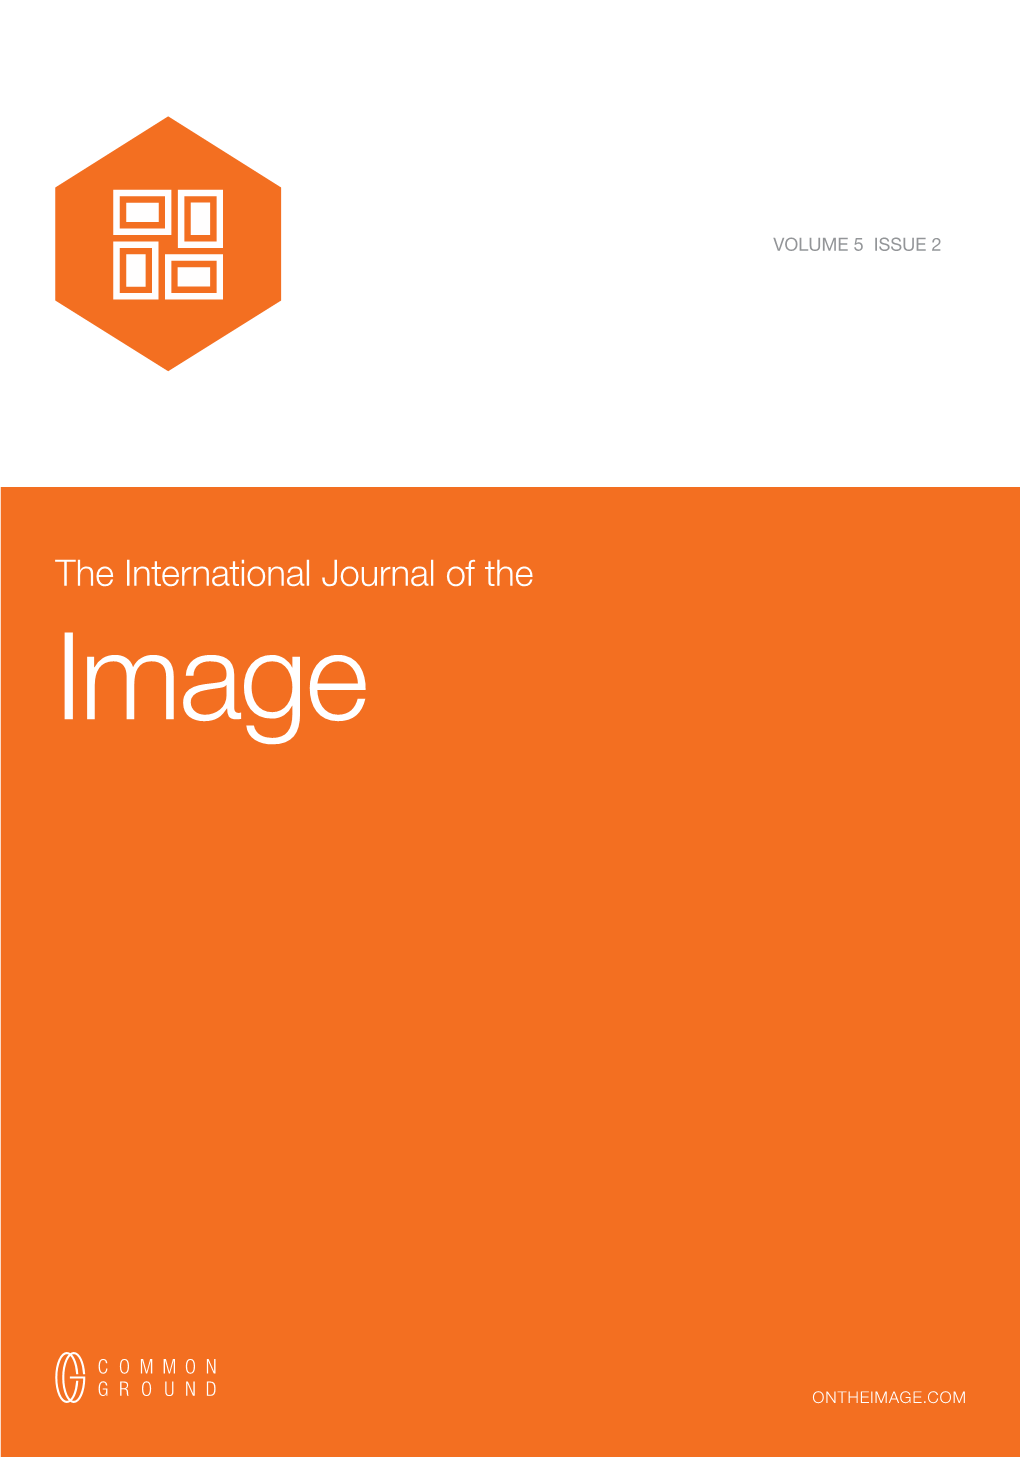 The International Journal of the Image